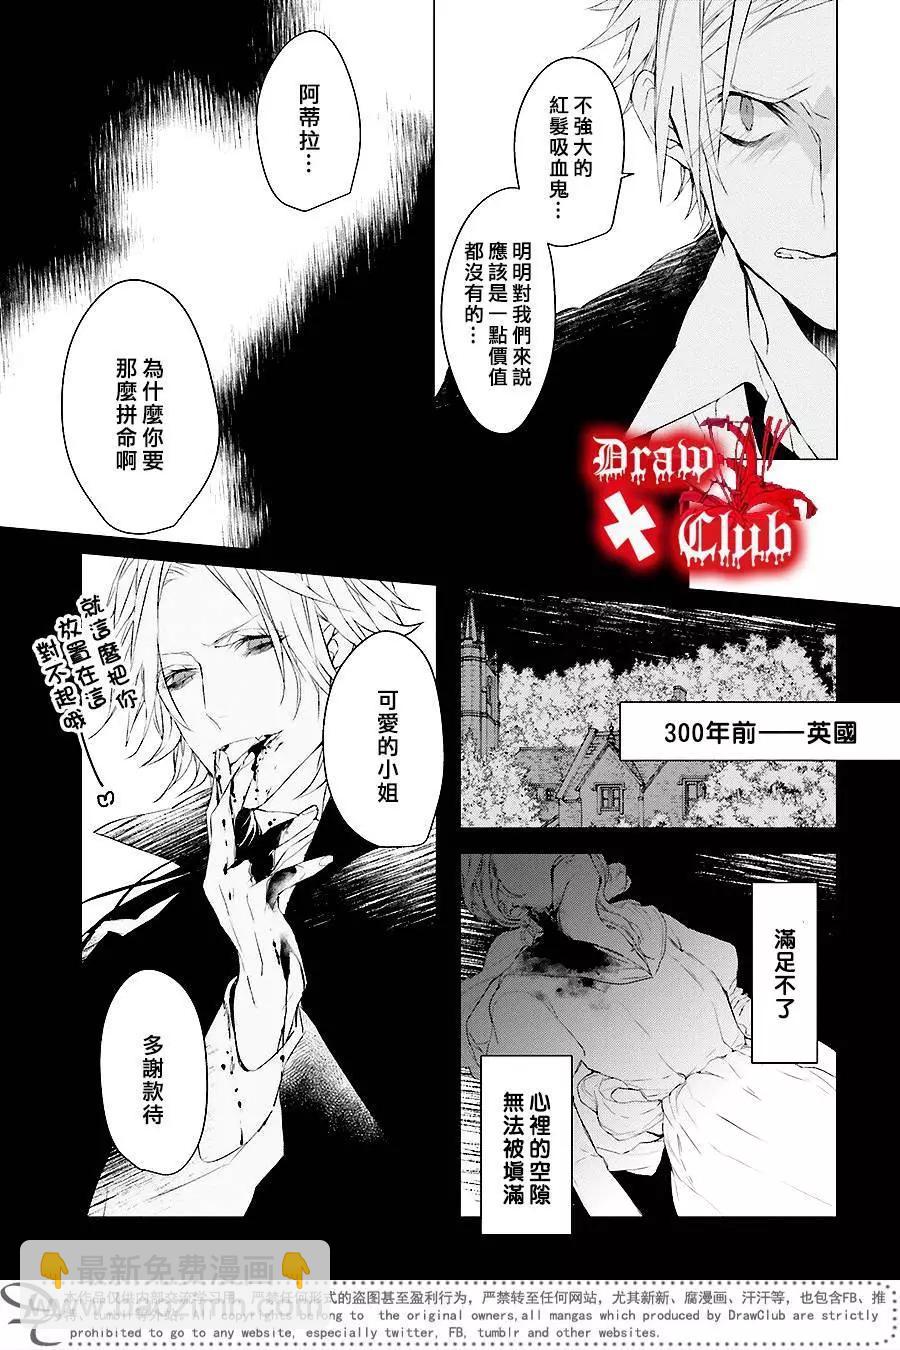 Bloody Mary - 第35回 - 4